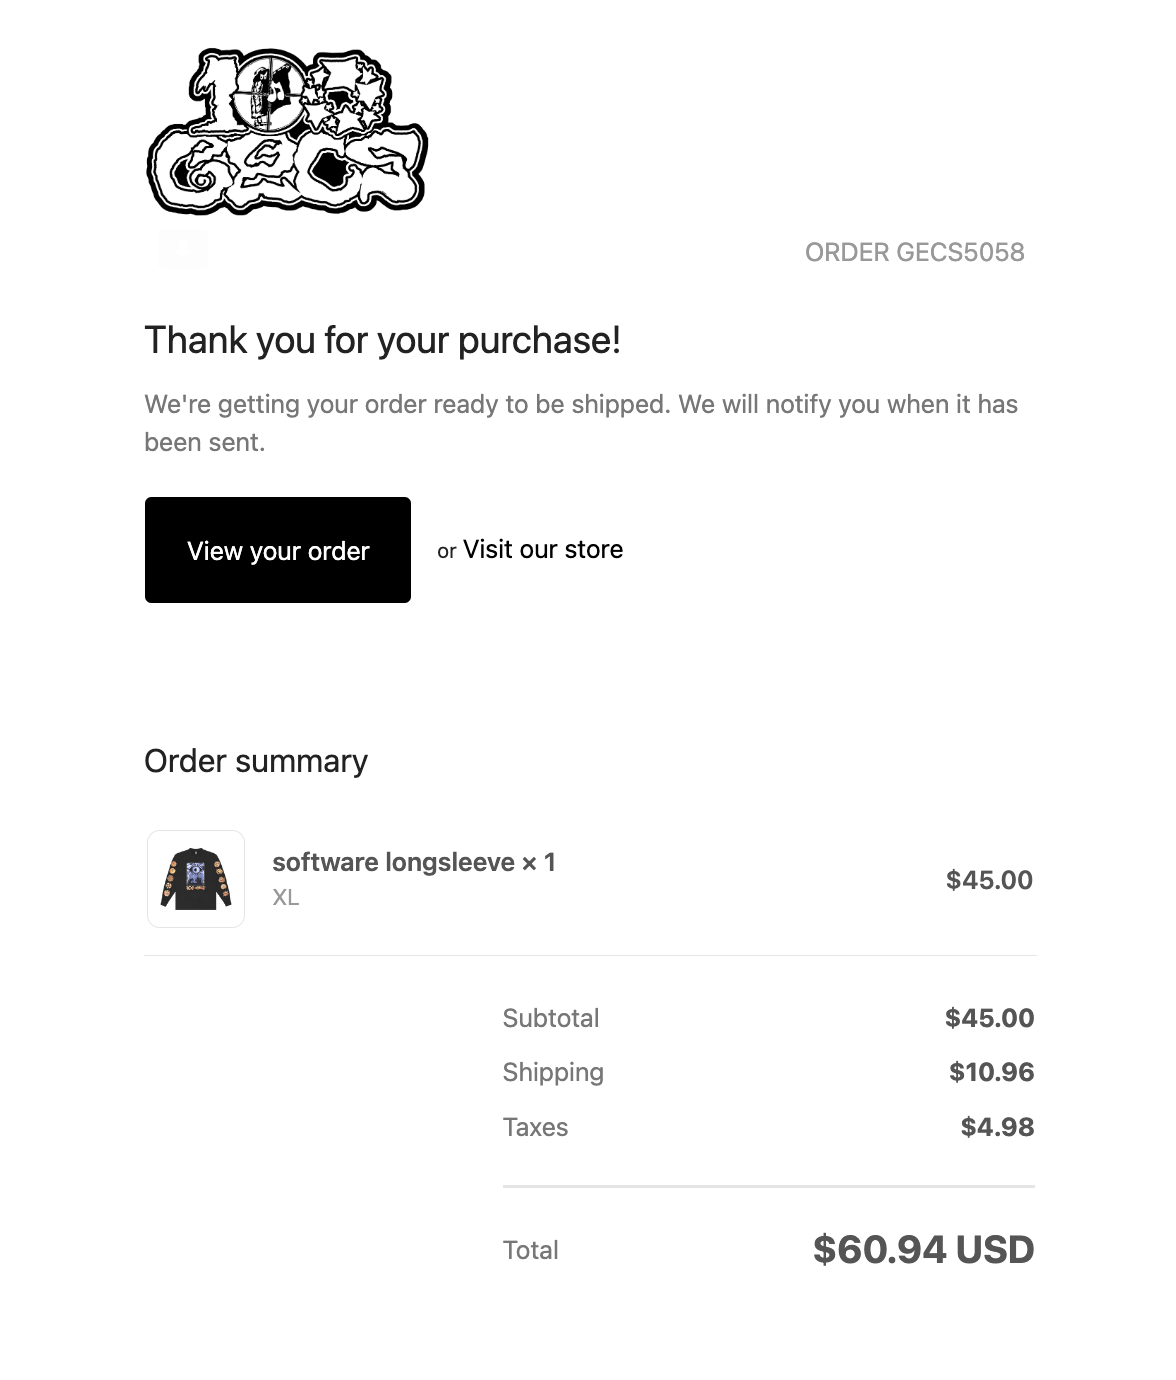 order confirmation email example